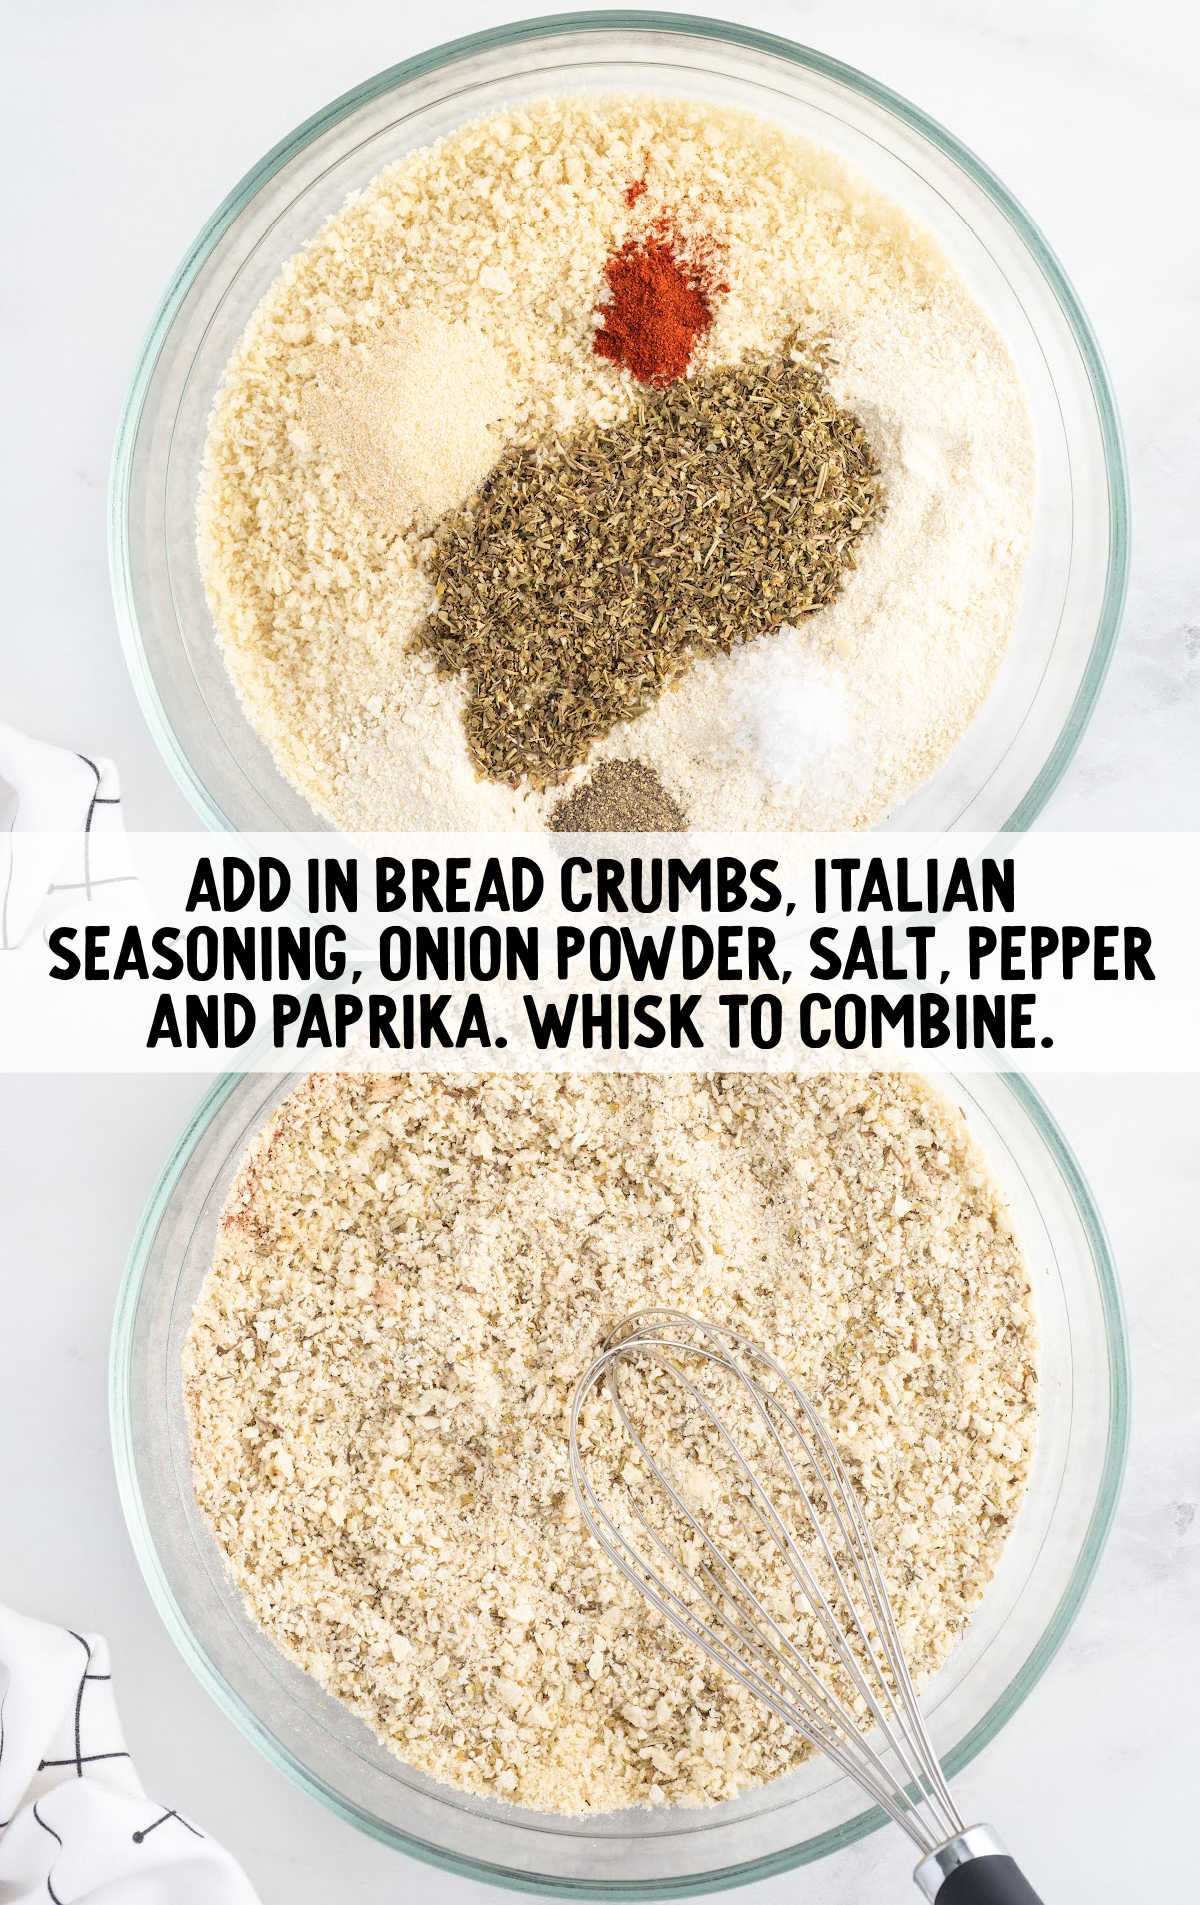 bread crumbs, Italian seasoning, onion powder, salt, pepper, and paprika whisked together in a bowl